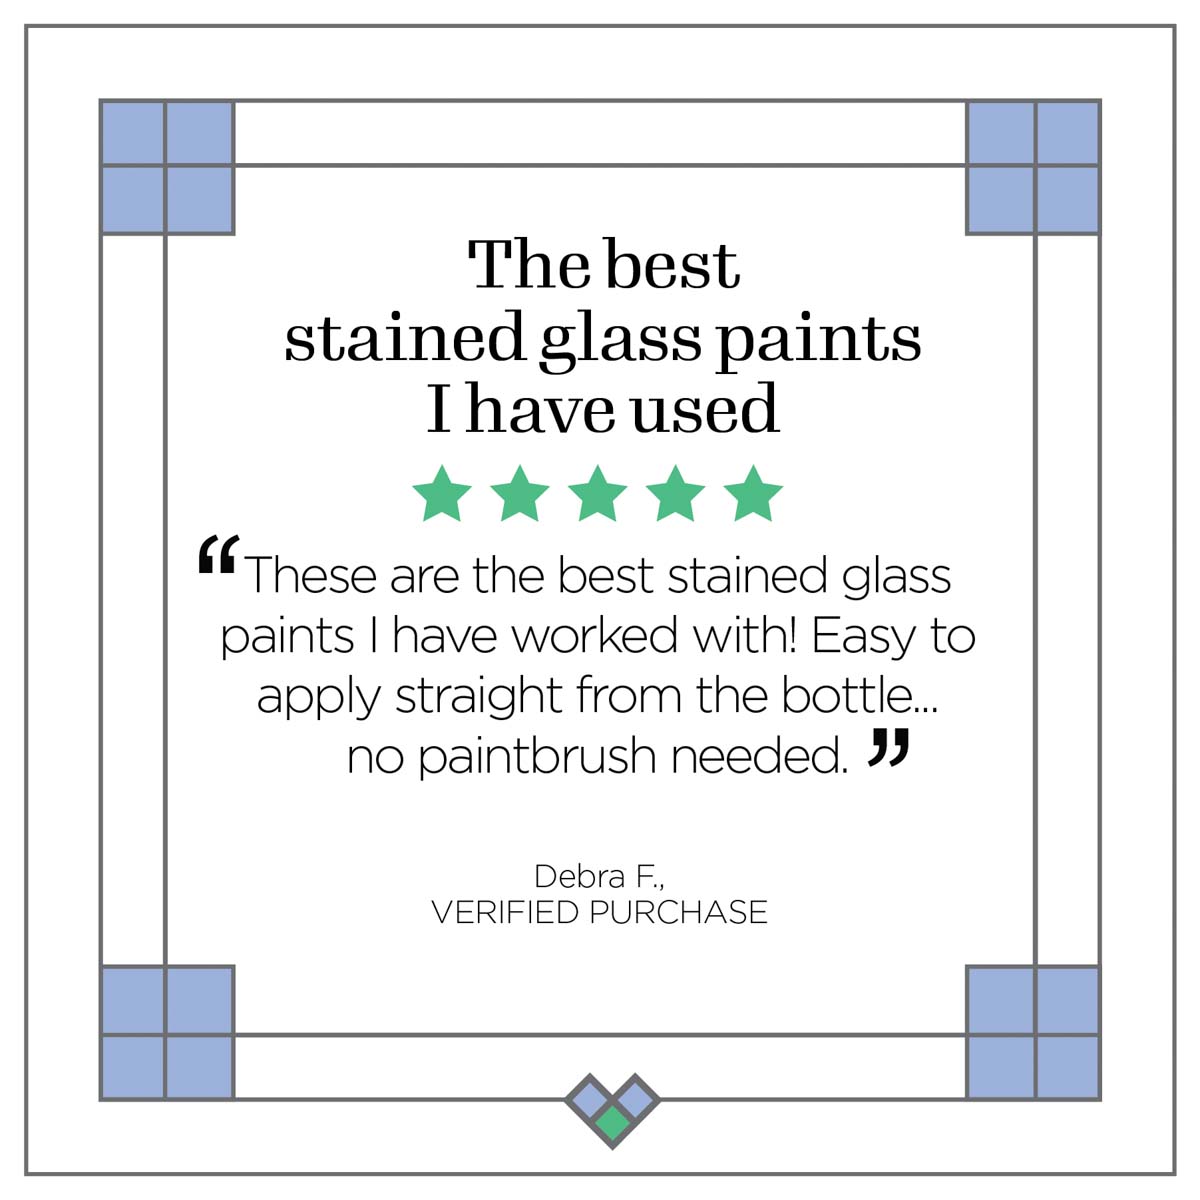 Gallery Glass ® Shimmer™ Stained Glass Effect Paint - Green, 2 oz. - 19689